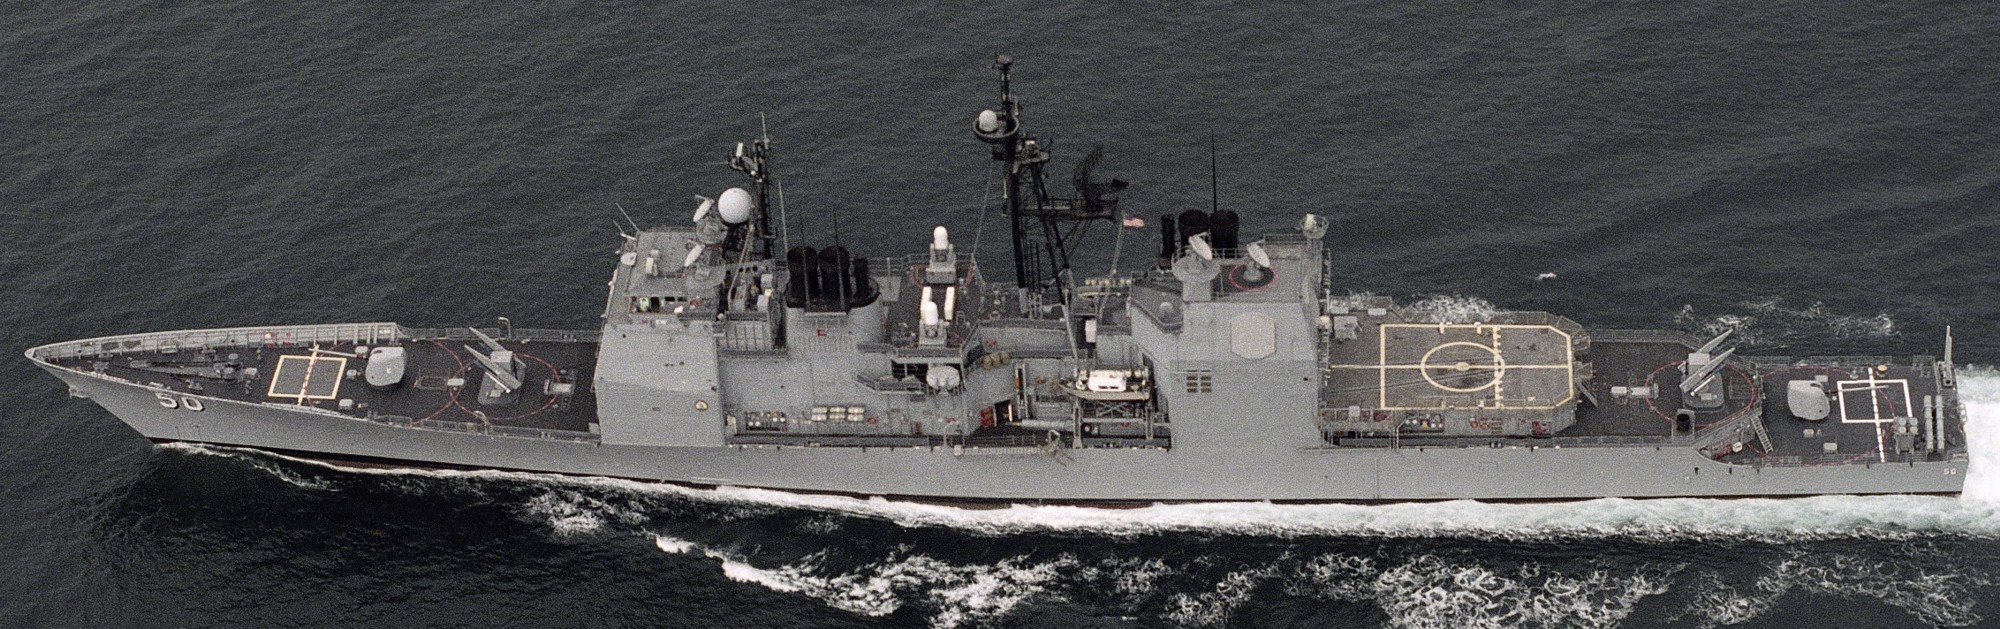 cg-50 uss valley forge ticonderoga class guided missile cruiser aegis us navy 29